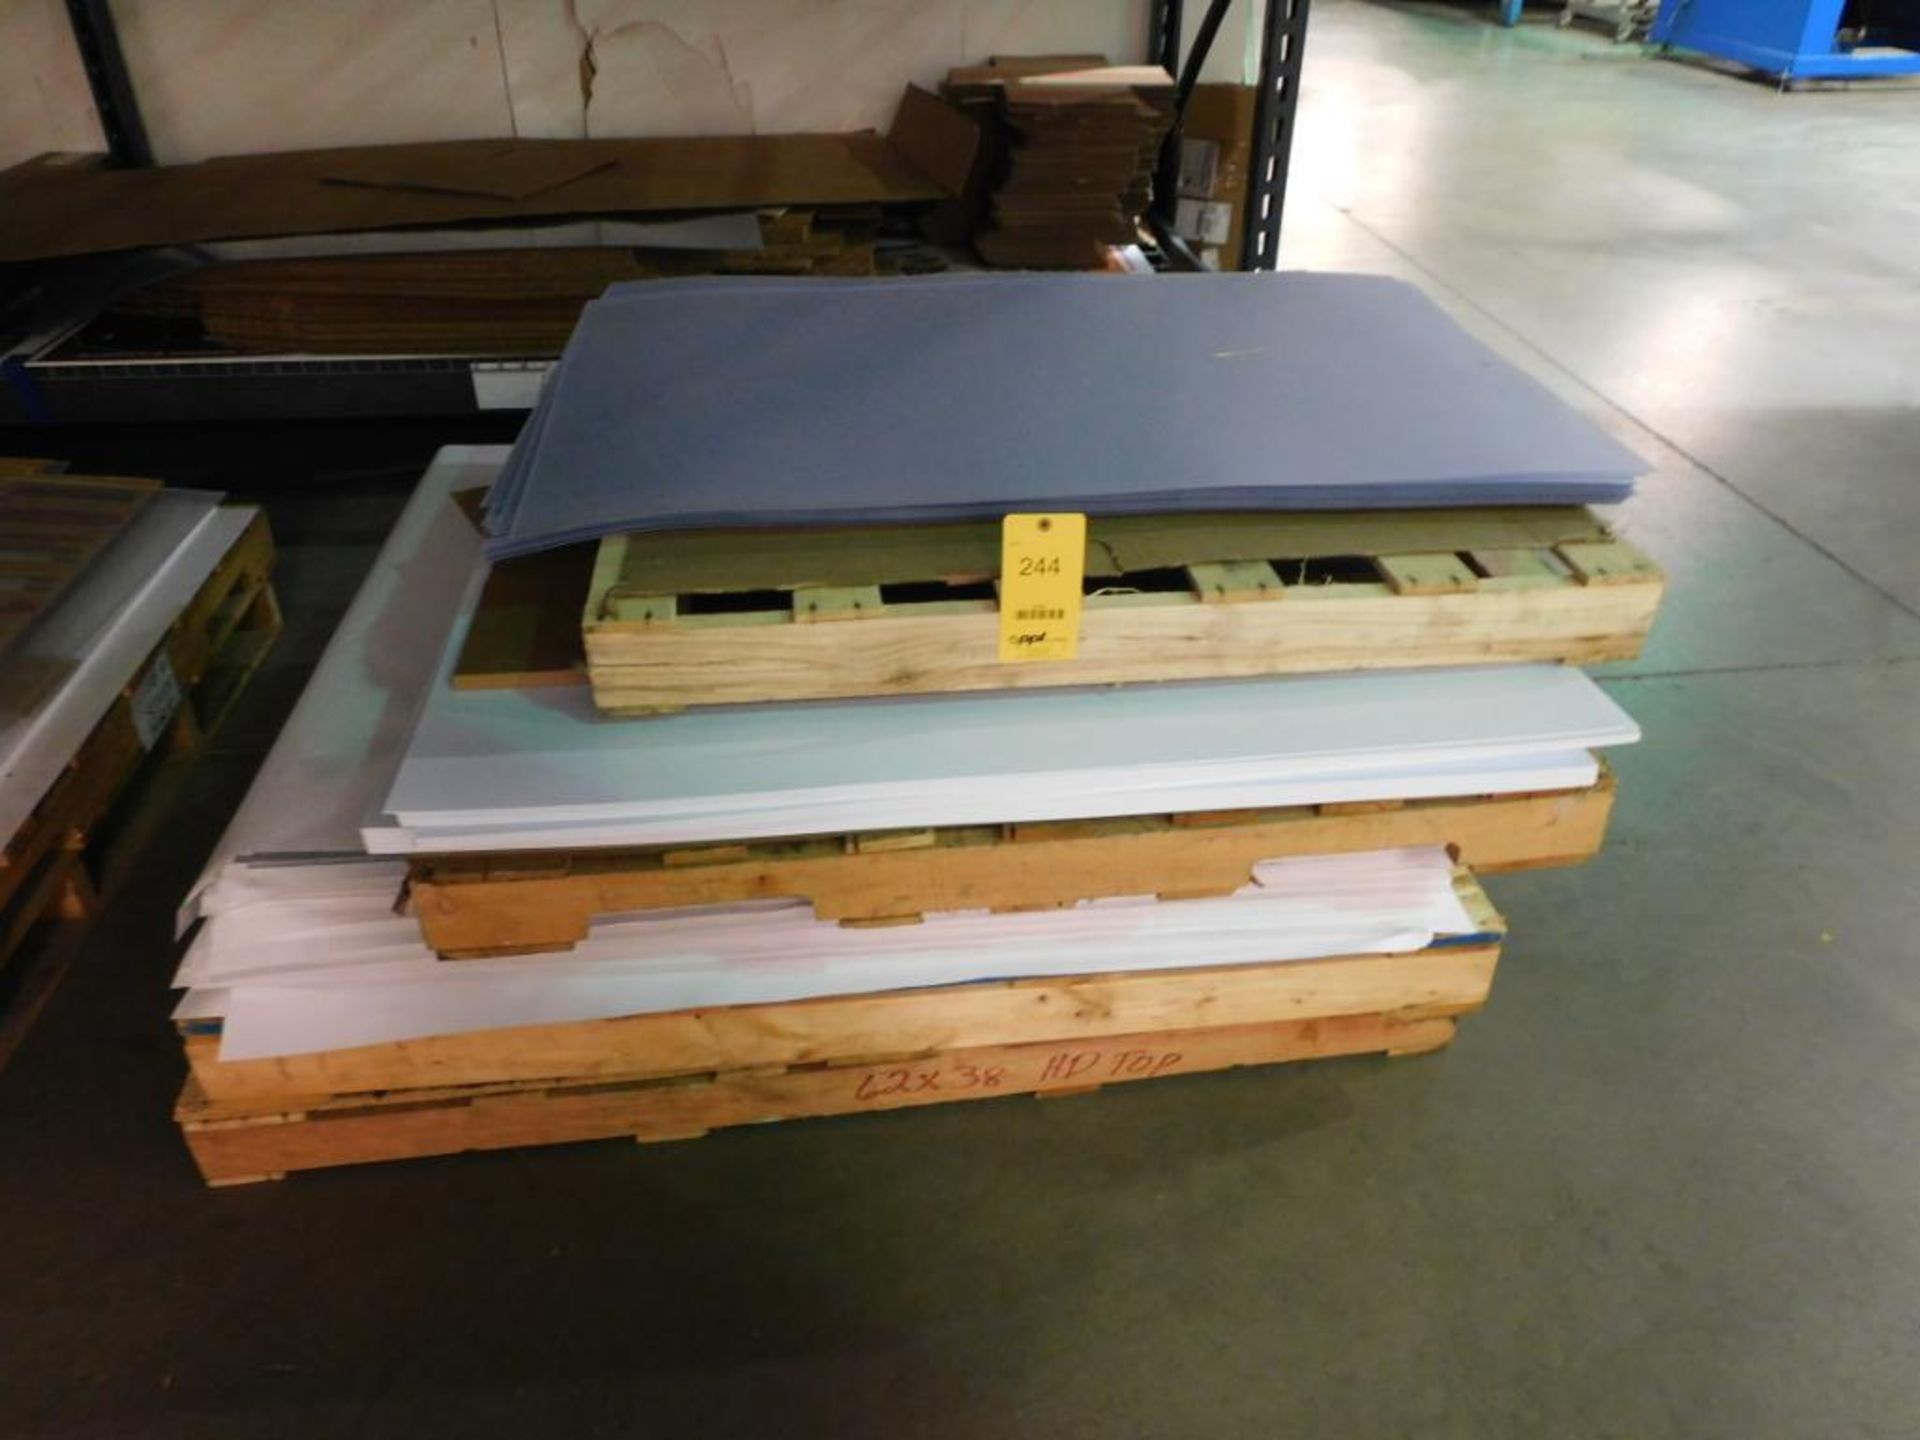 LOT: Assorted Material on Skid